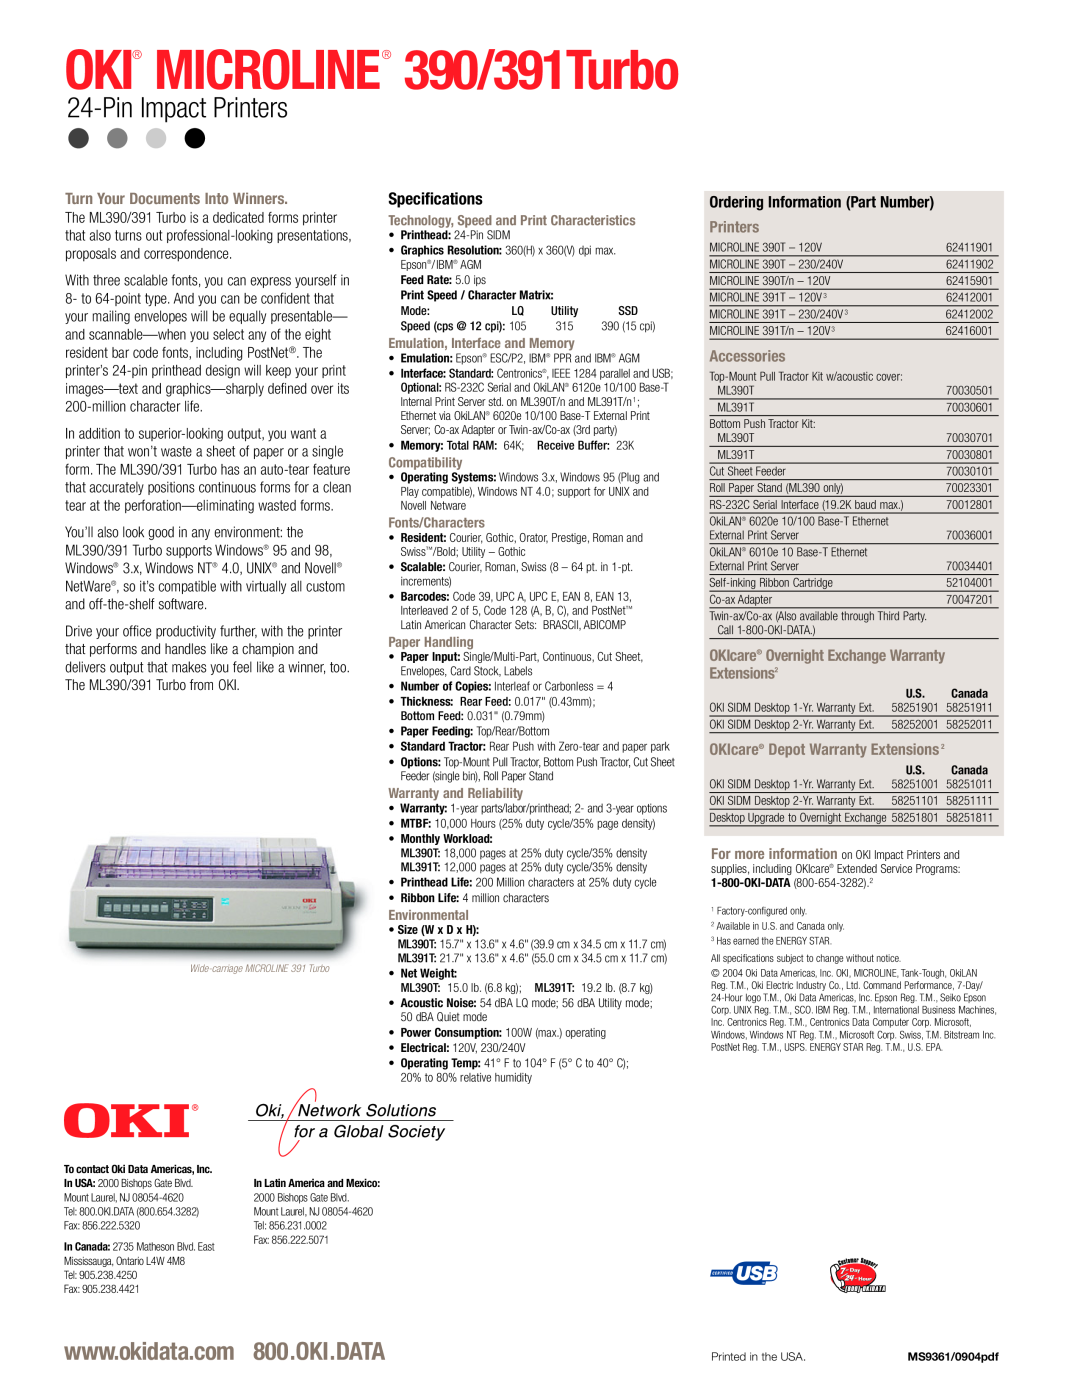 Oki ML390 OKI MICROLINE 390/391Turbo, Pin Impact Printers, Specifications, Turn Your Documents Into Winners, Accessories 